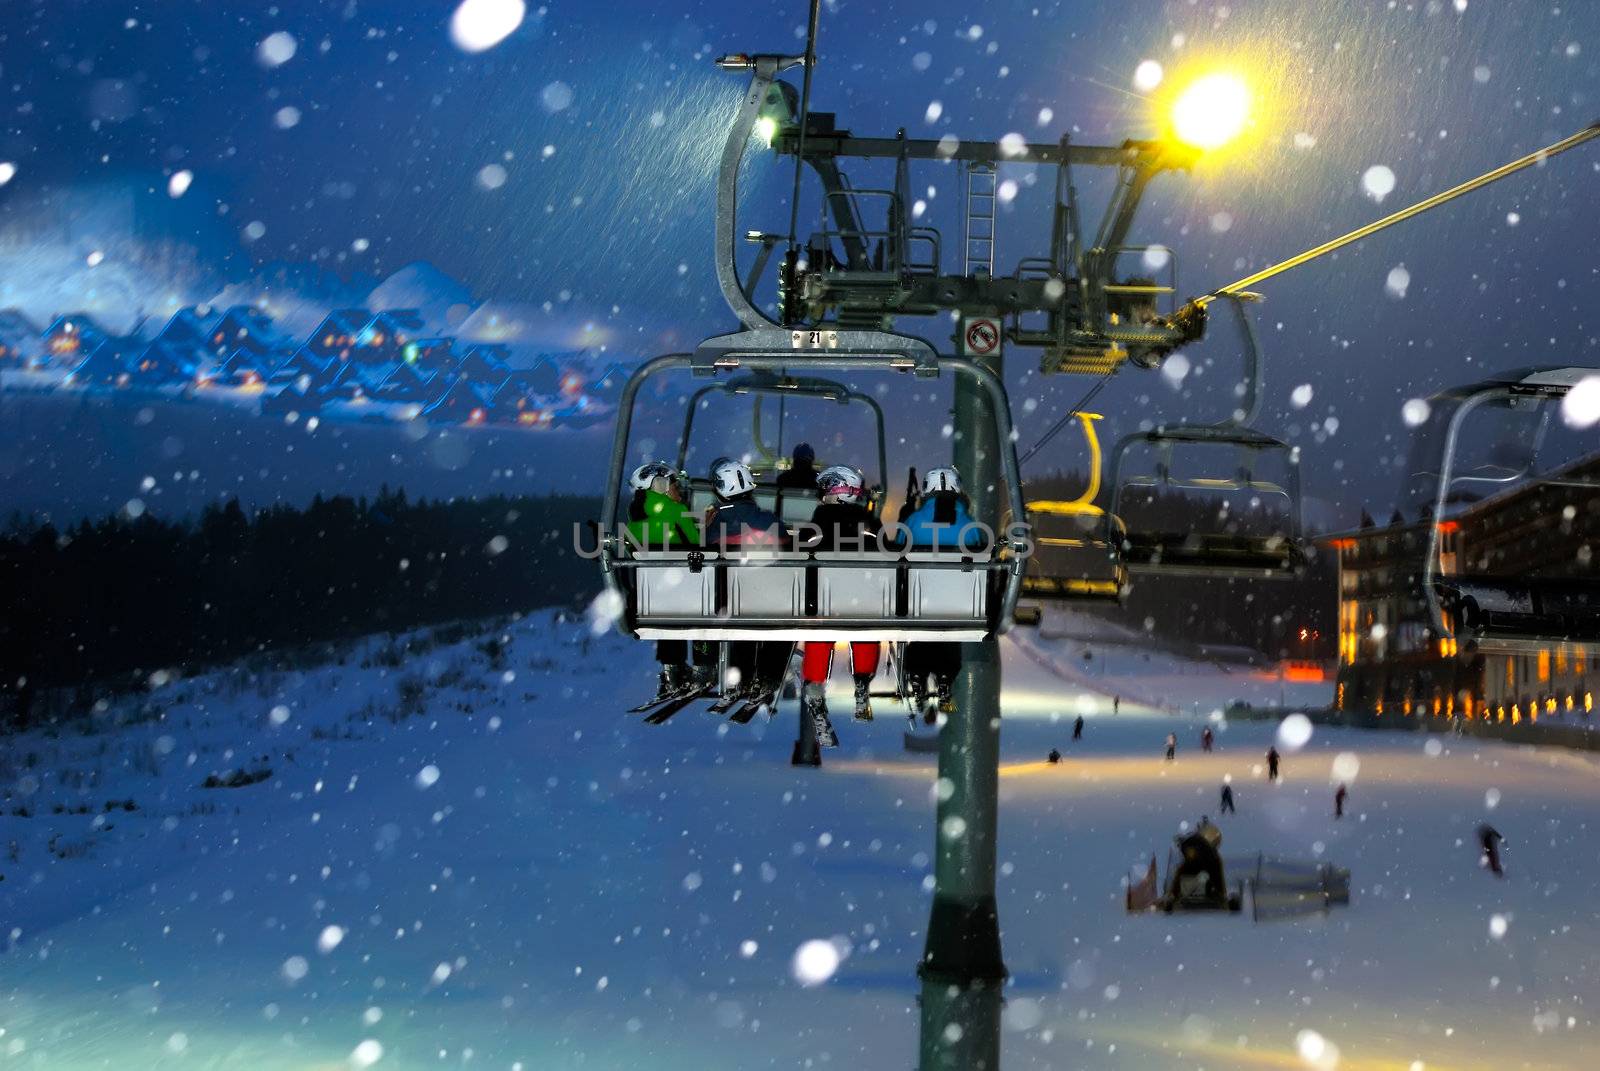 people ride in the chair lift, elevator, night landscape